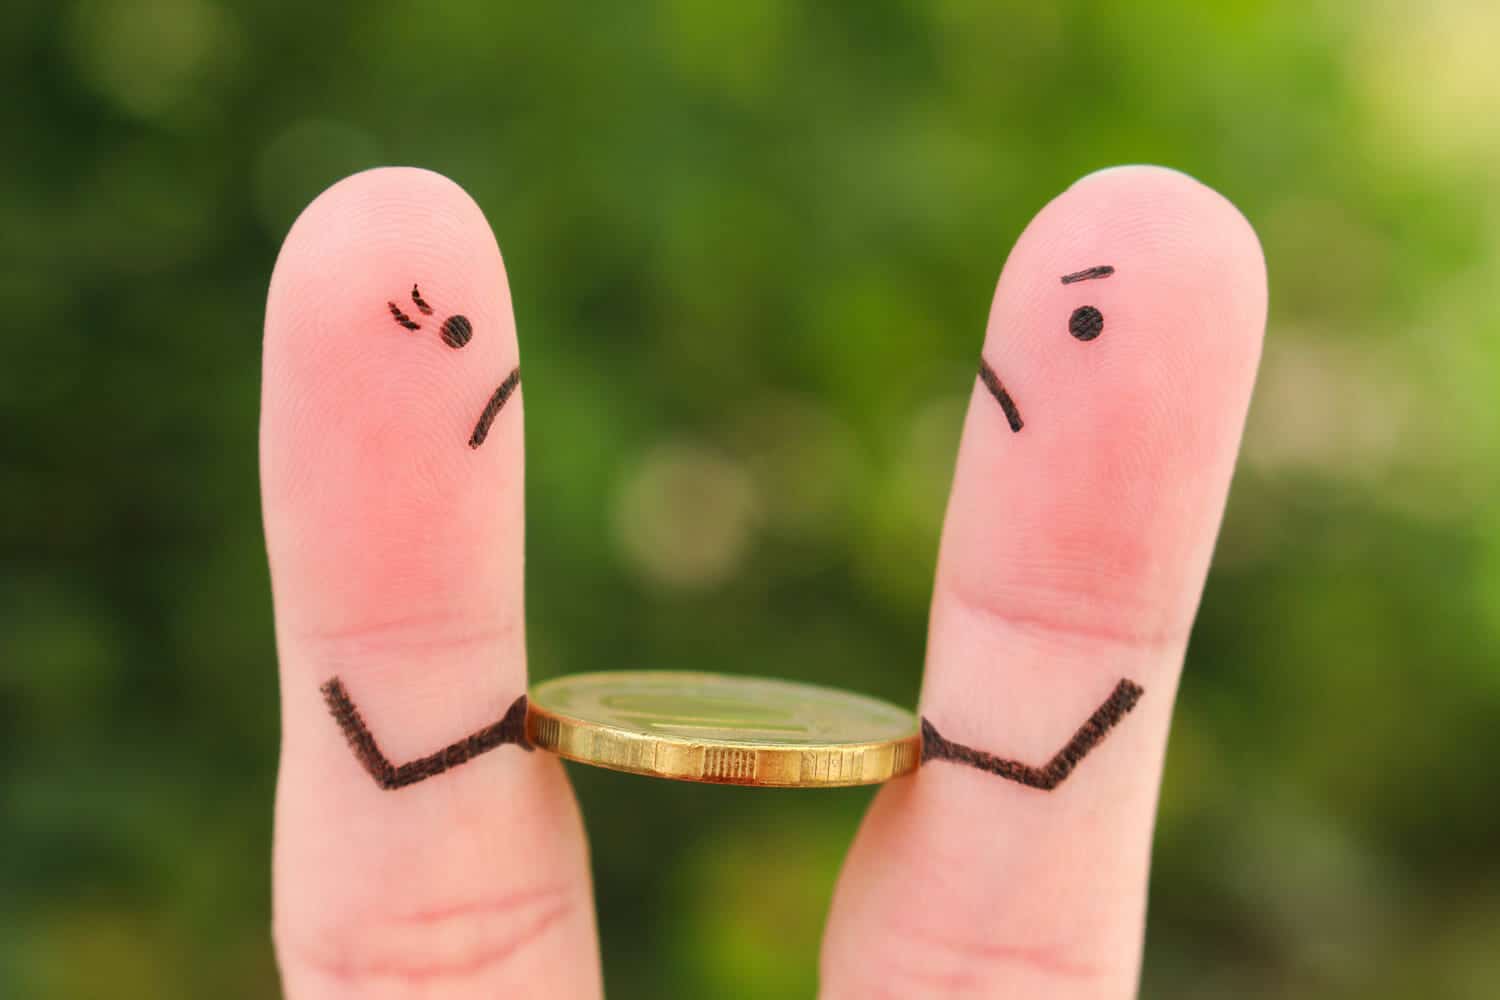 length of marriage and alimony